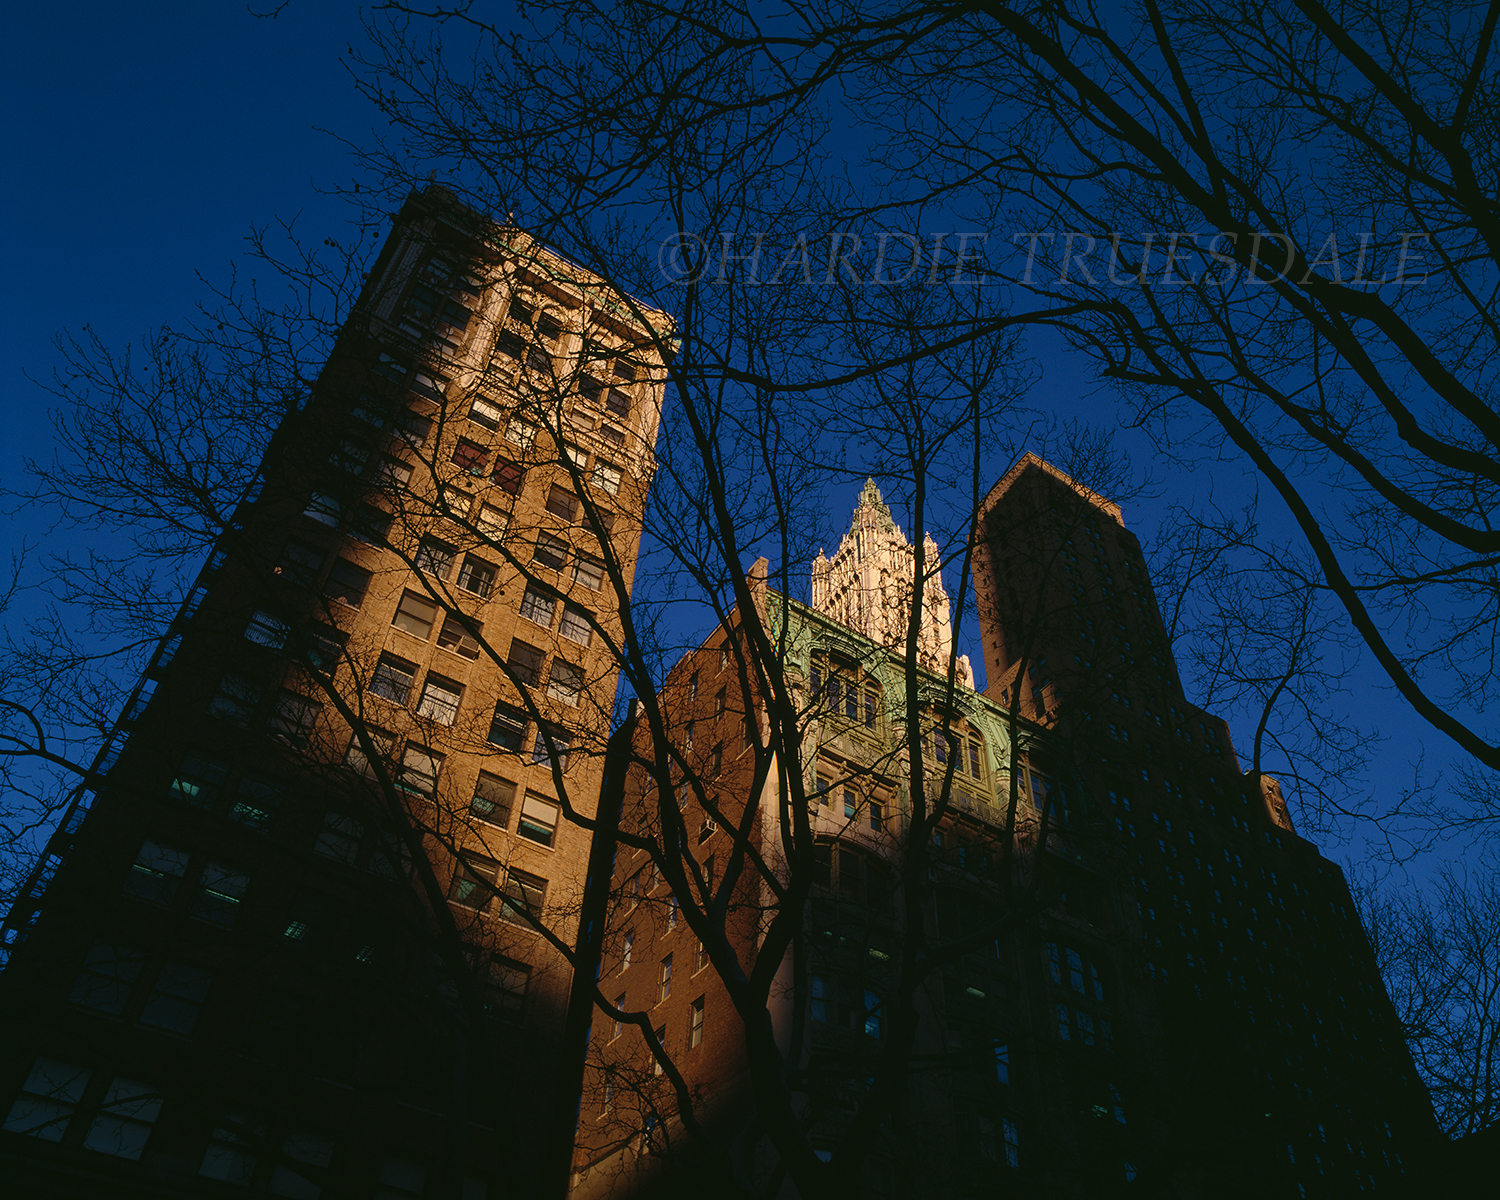 NYC#14 "Woolworth Building from Union Square"